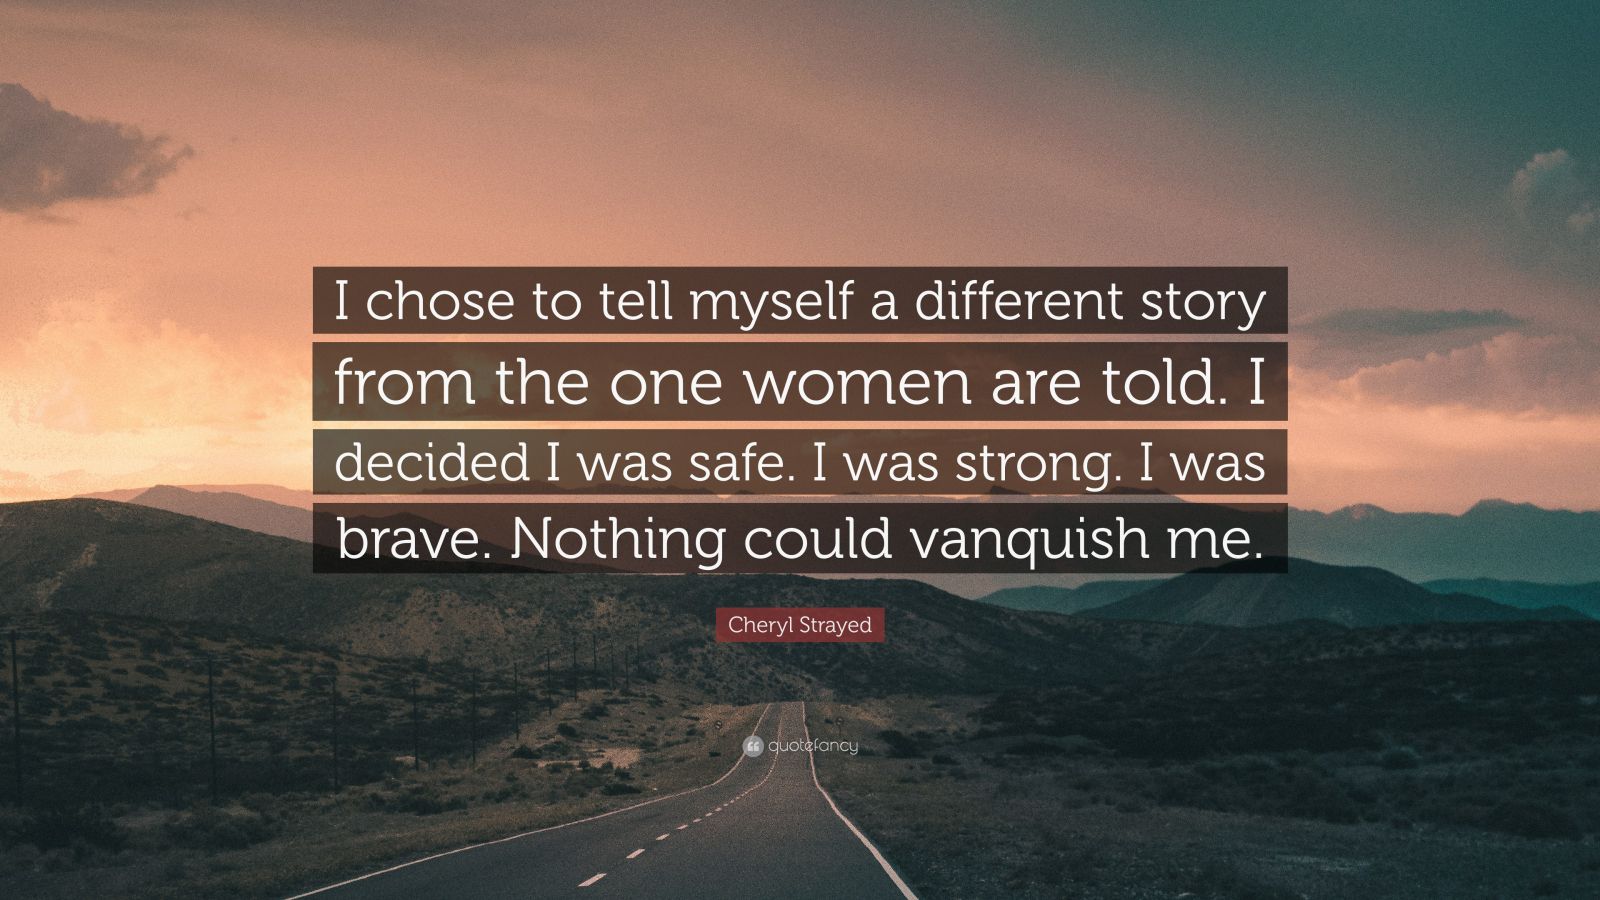 Cheryl Strayed Quote “i Chose To Tell Myself A Different Story From The One Women Are Told I